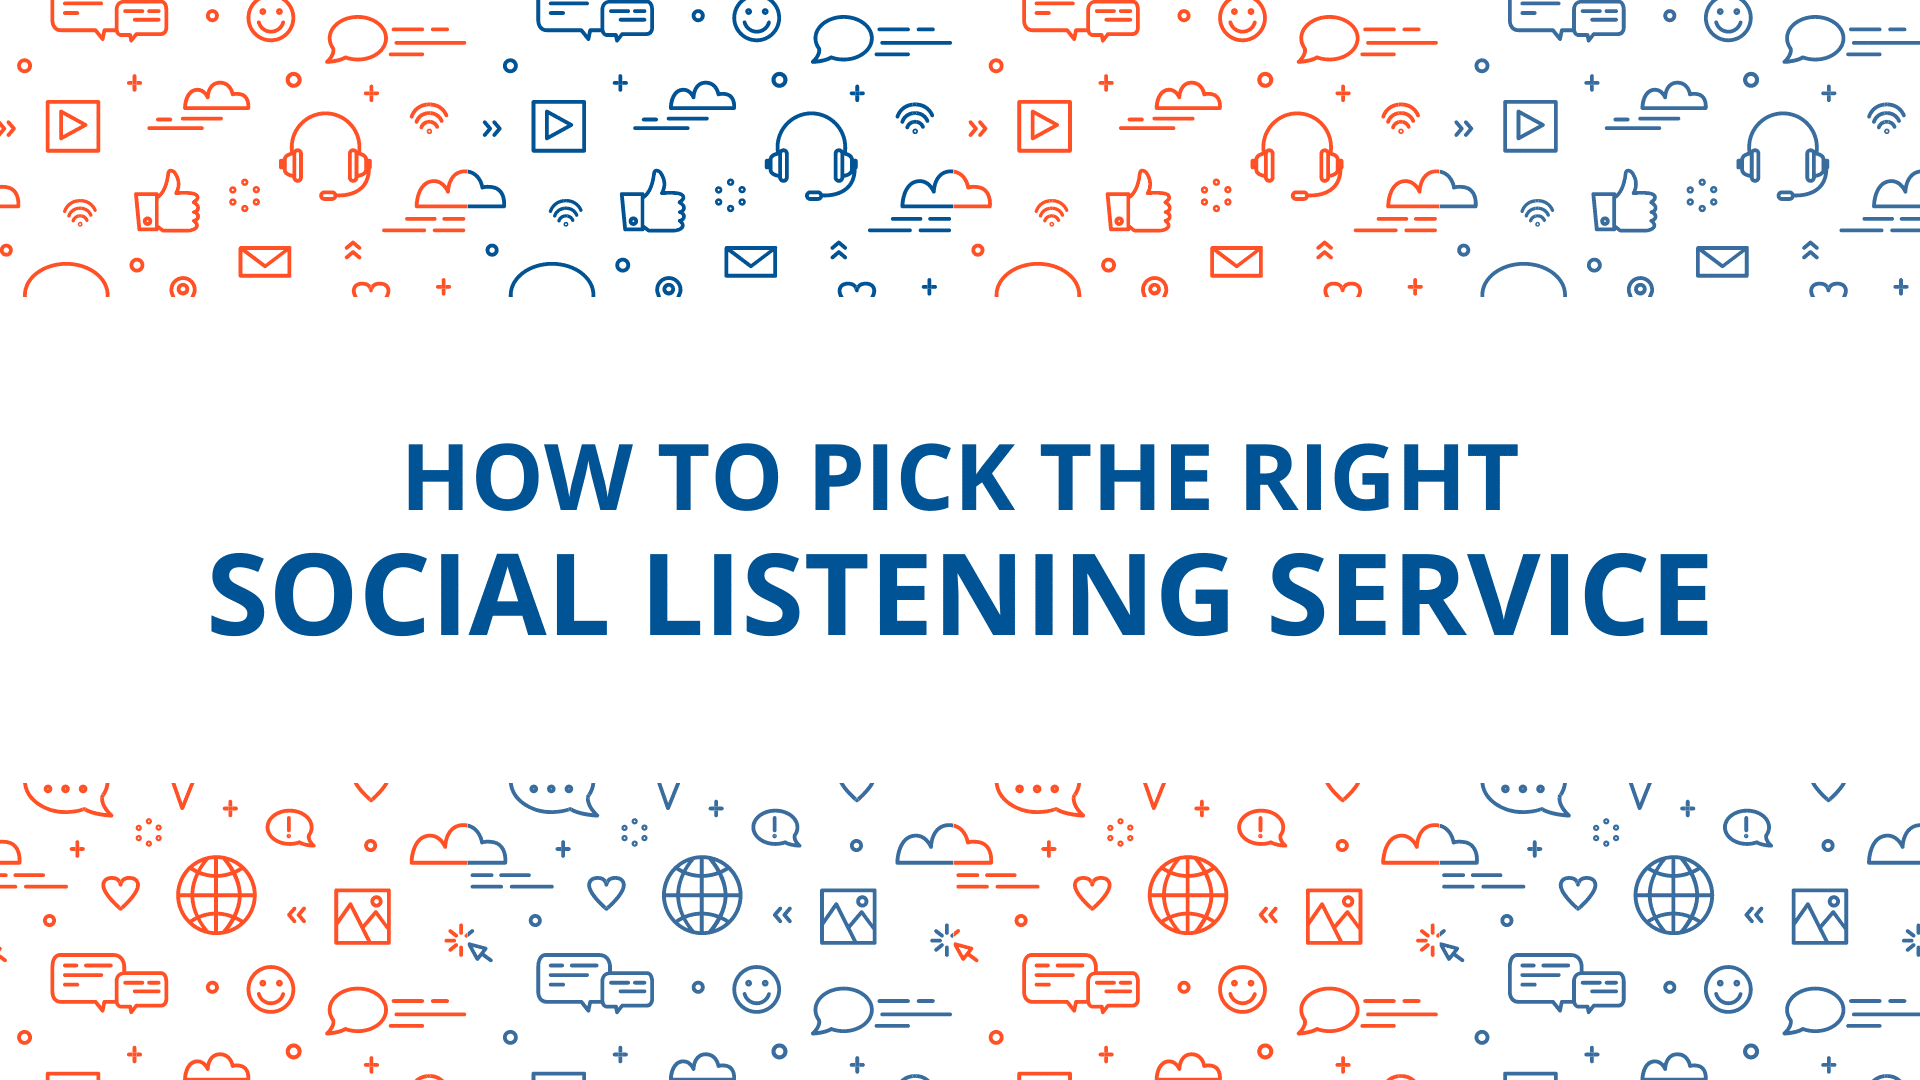 How to pick the right social listening service